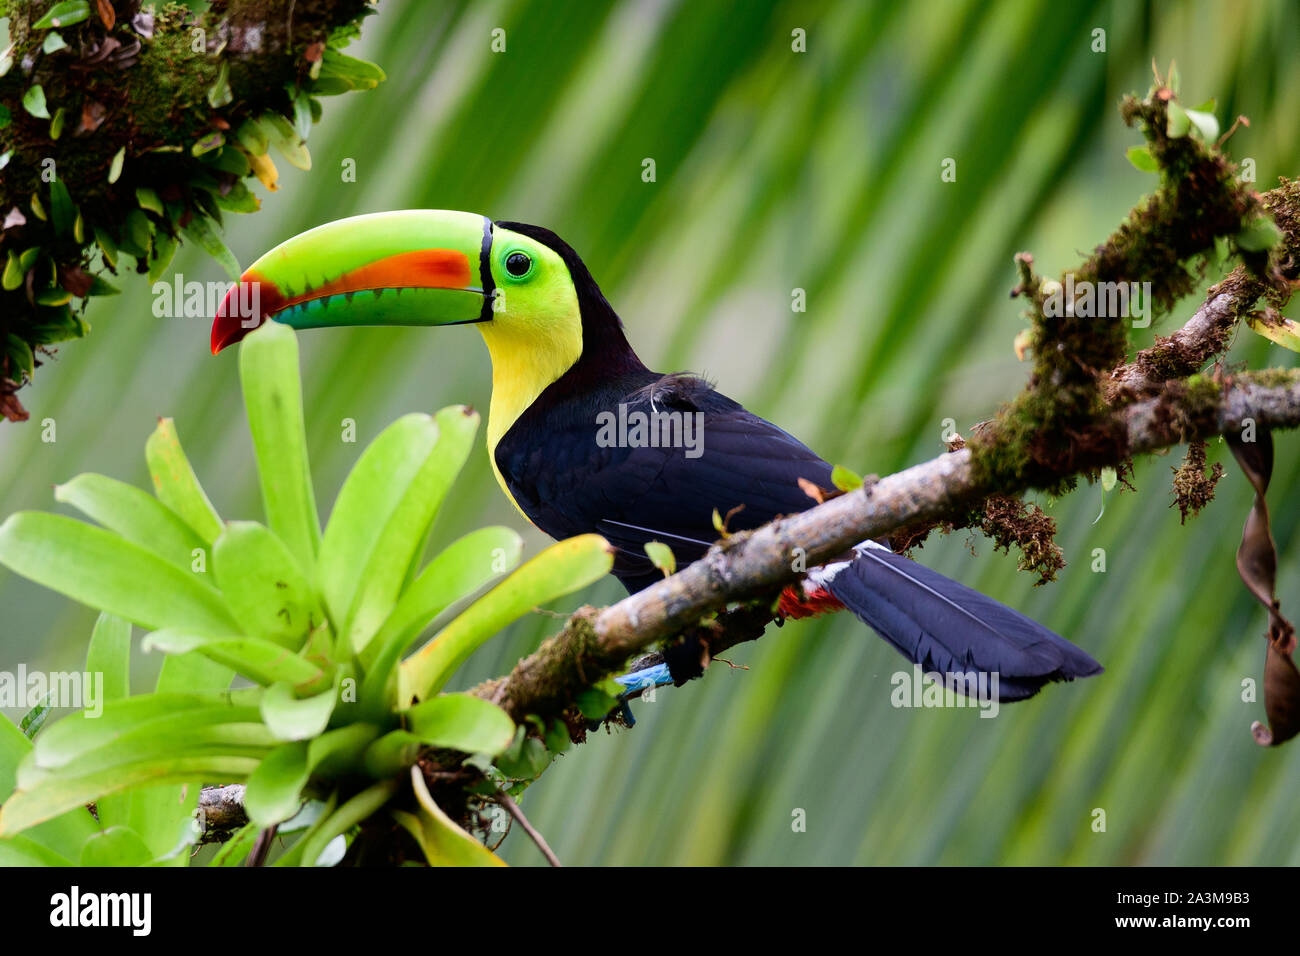 Keel billed toucan sitting on a branch Stock Photo